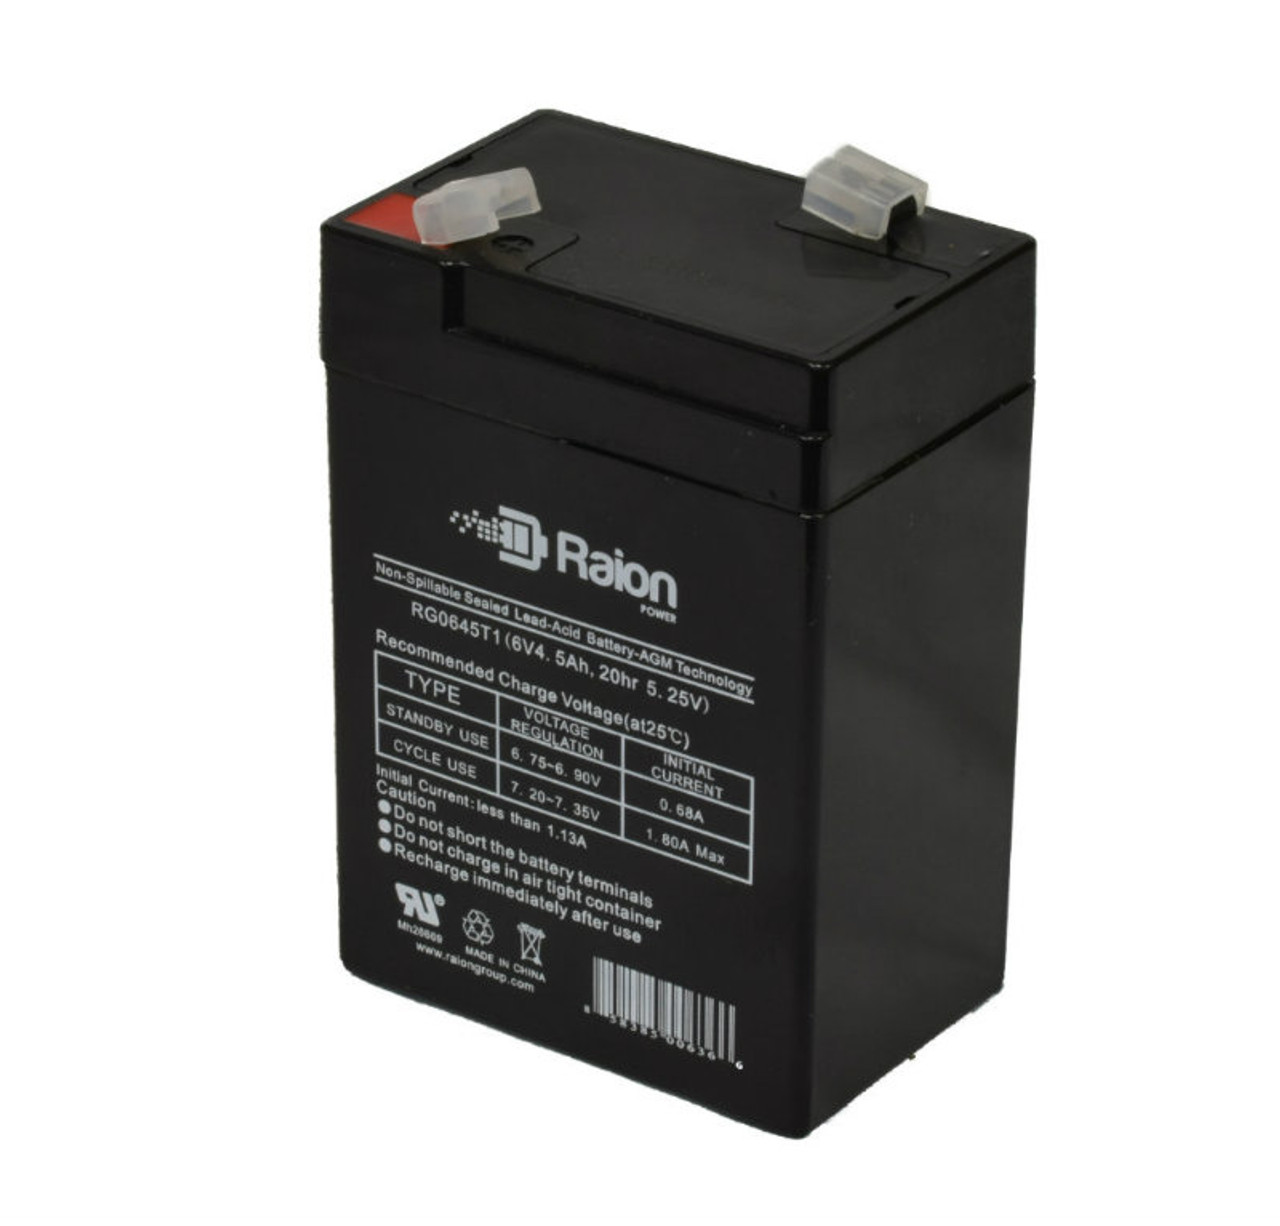 Raion Power RG0645T1 6V 4.5Ah Replacement Battery Cartridge for Kweight Power KW 6-4.5